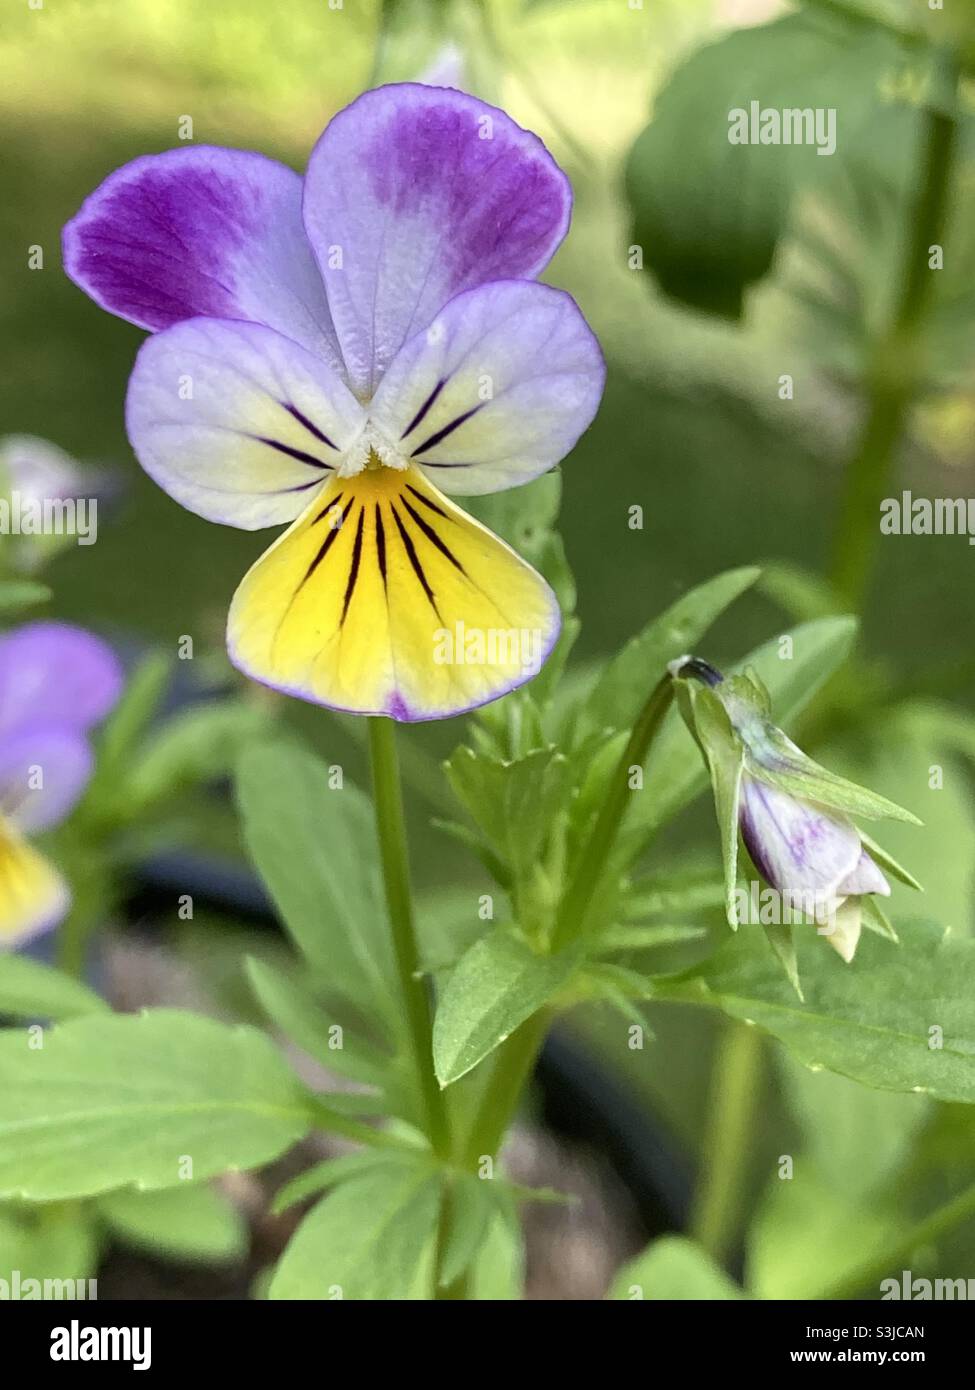 A Closeup on a Common Johnny Jump Up Flower Stock Photo